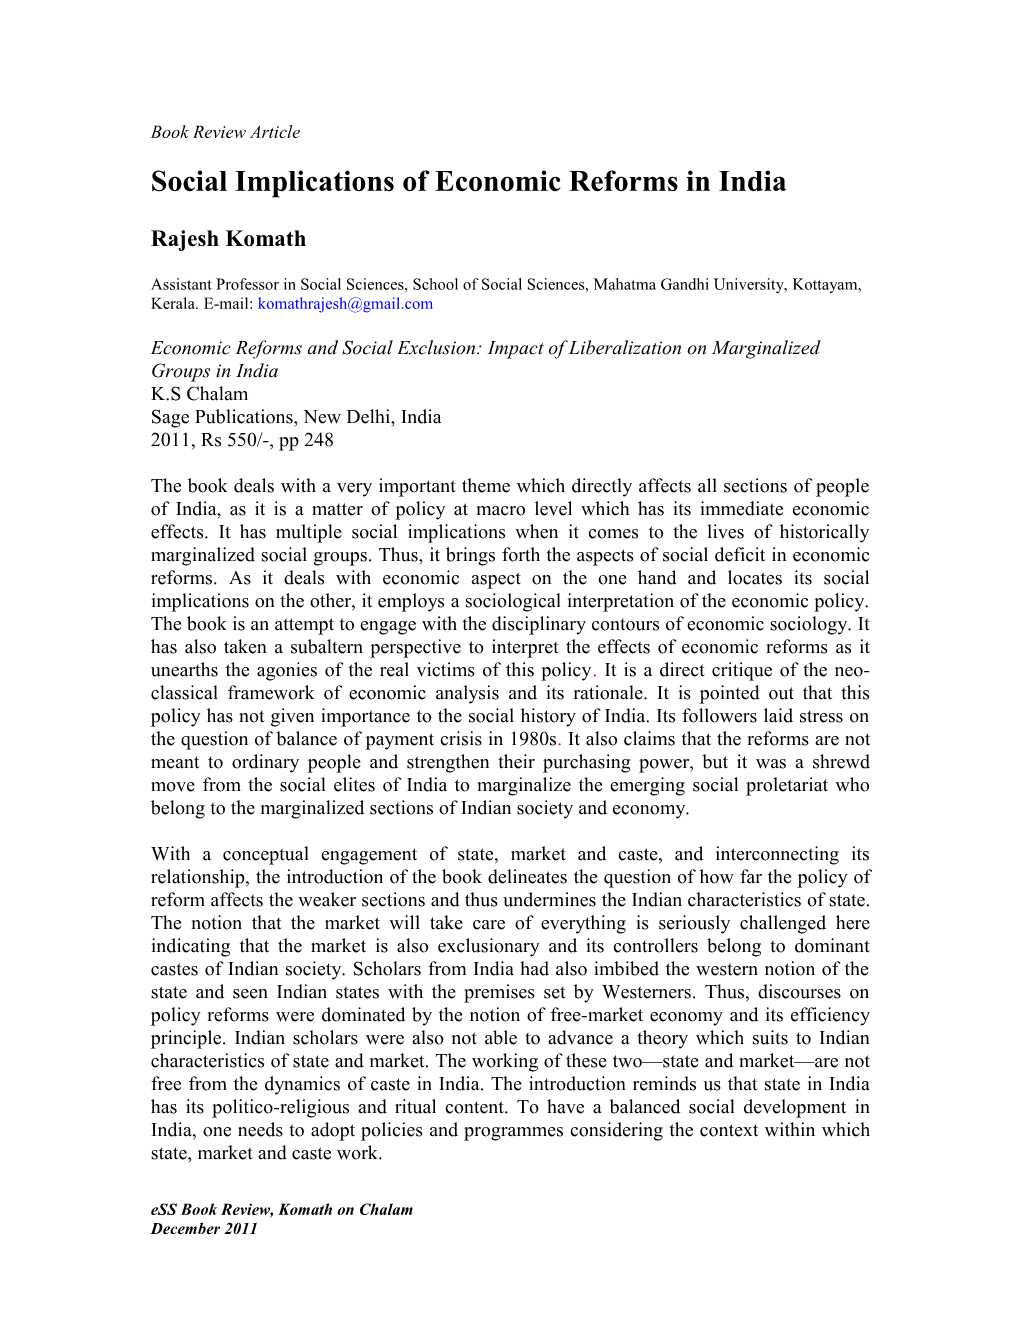 Social Implications of Economic Reforms in India